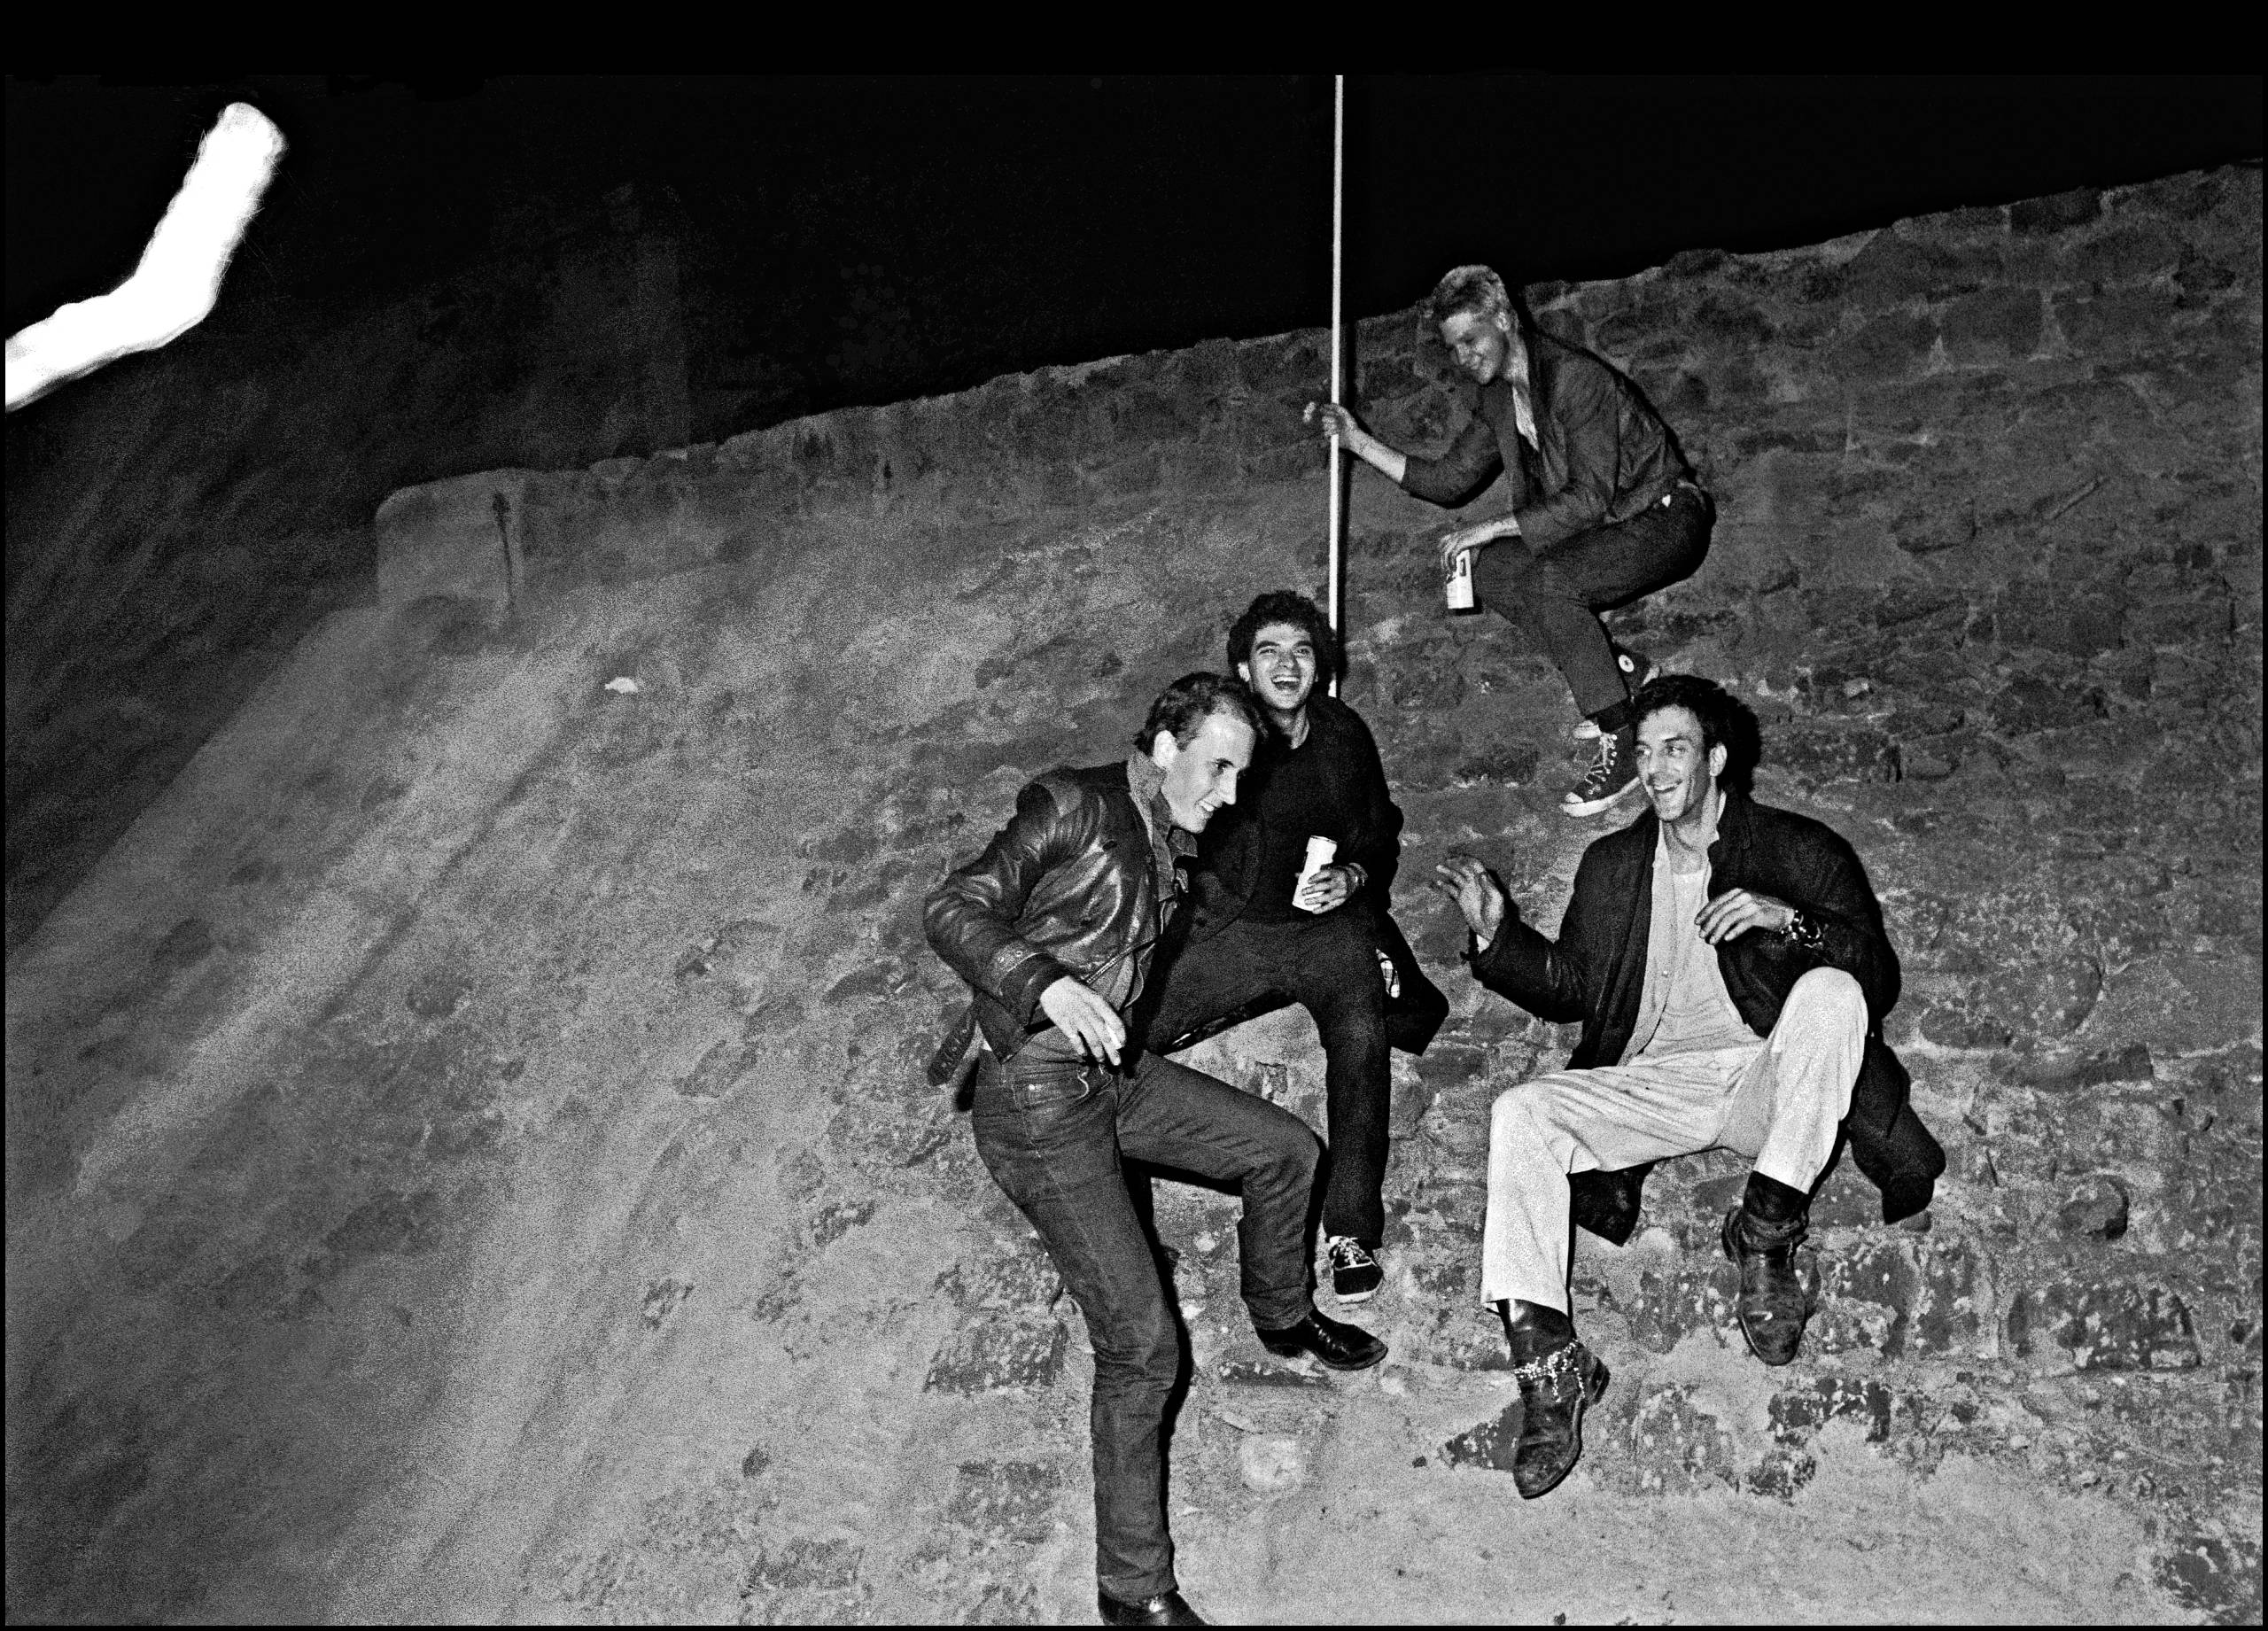 A group of four young men clamber down a very steep wall, laughing and at strange angles. One of them is holding a pool cue. Two of them are holding cans of beer.